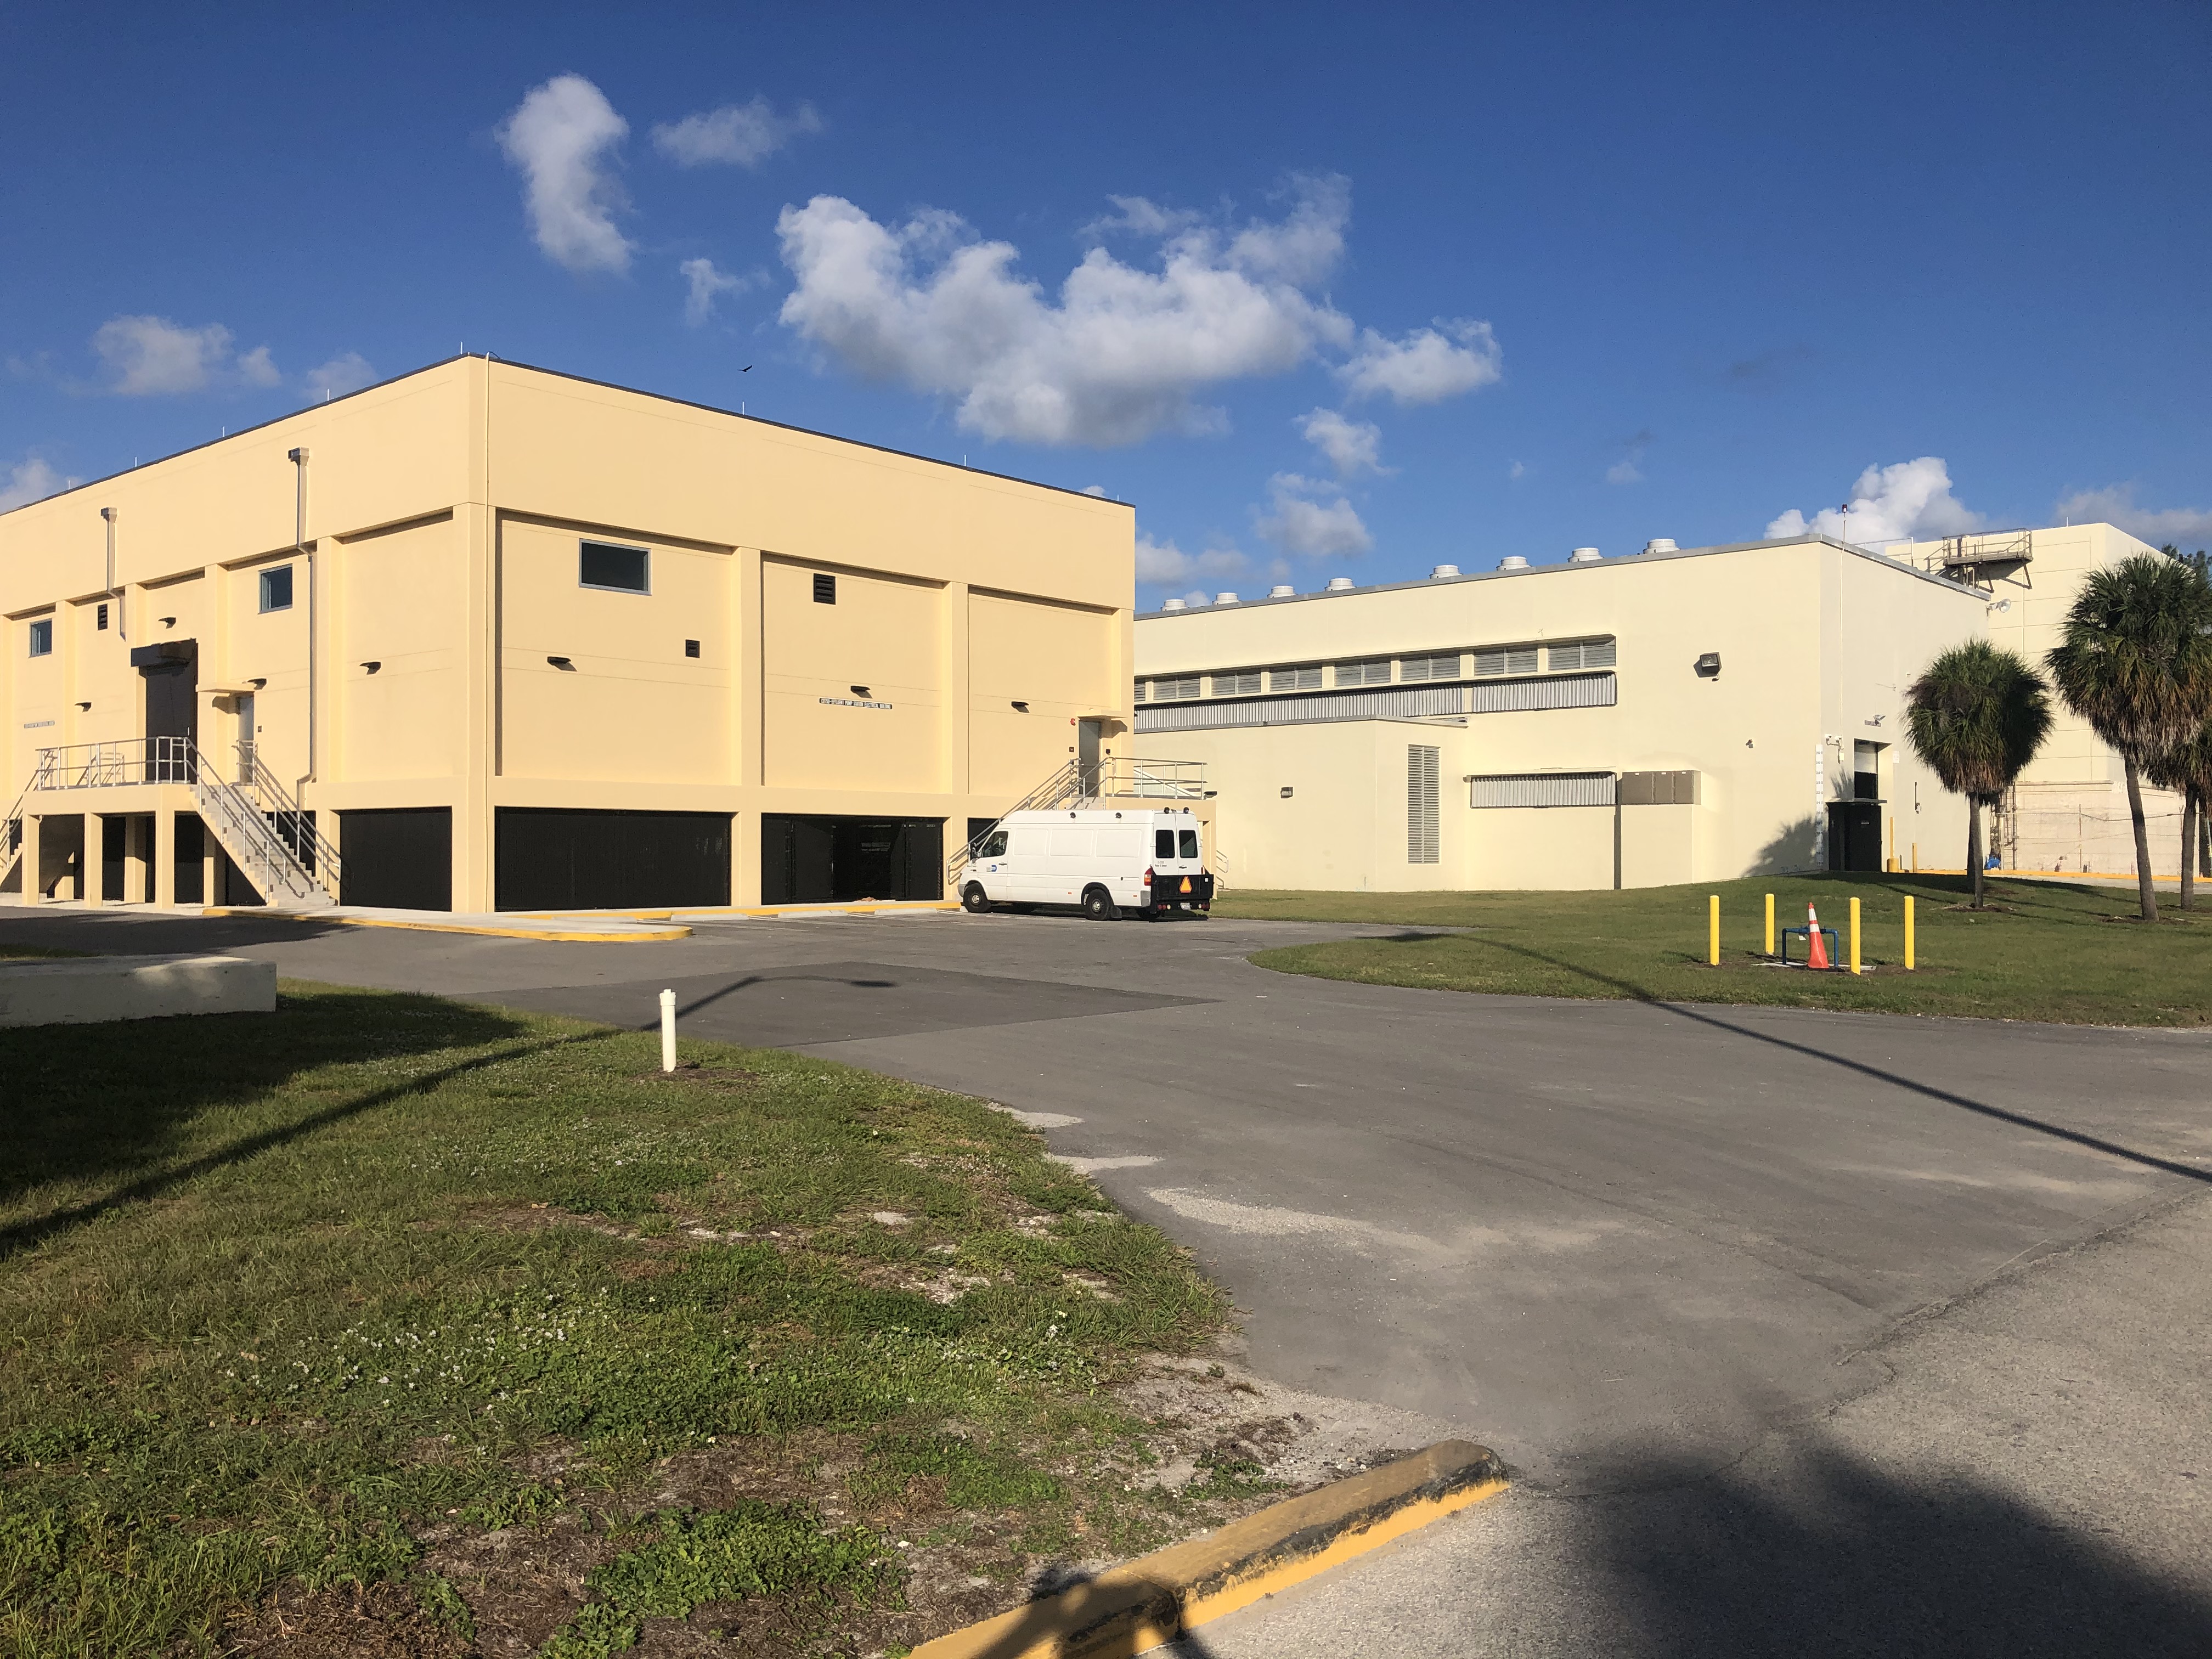 Beige building is Wastewater Treatment Plant facility in Miami